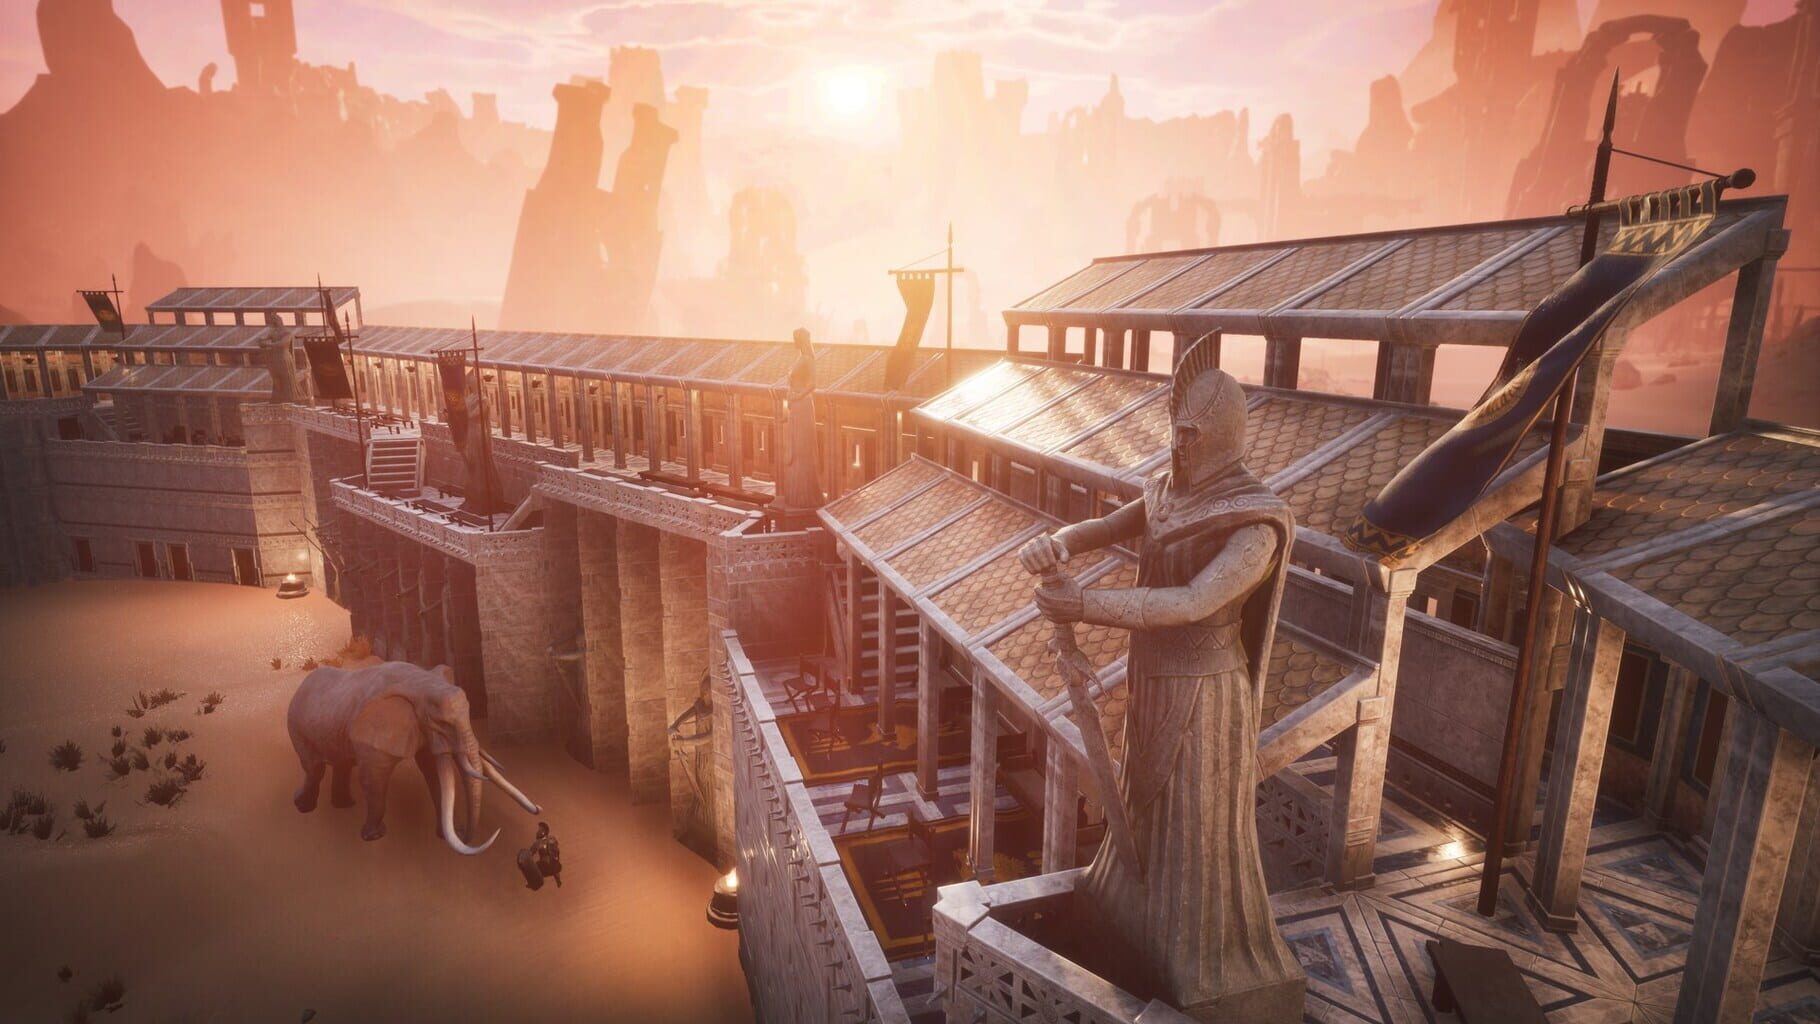 Conan Exiles: Jewel of the West Pack Image